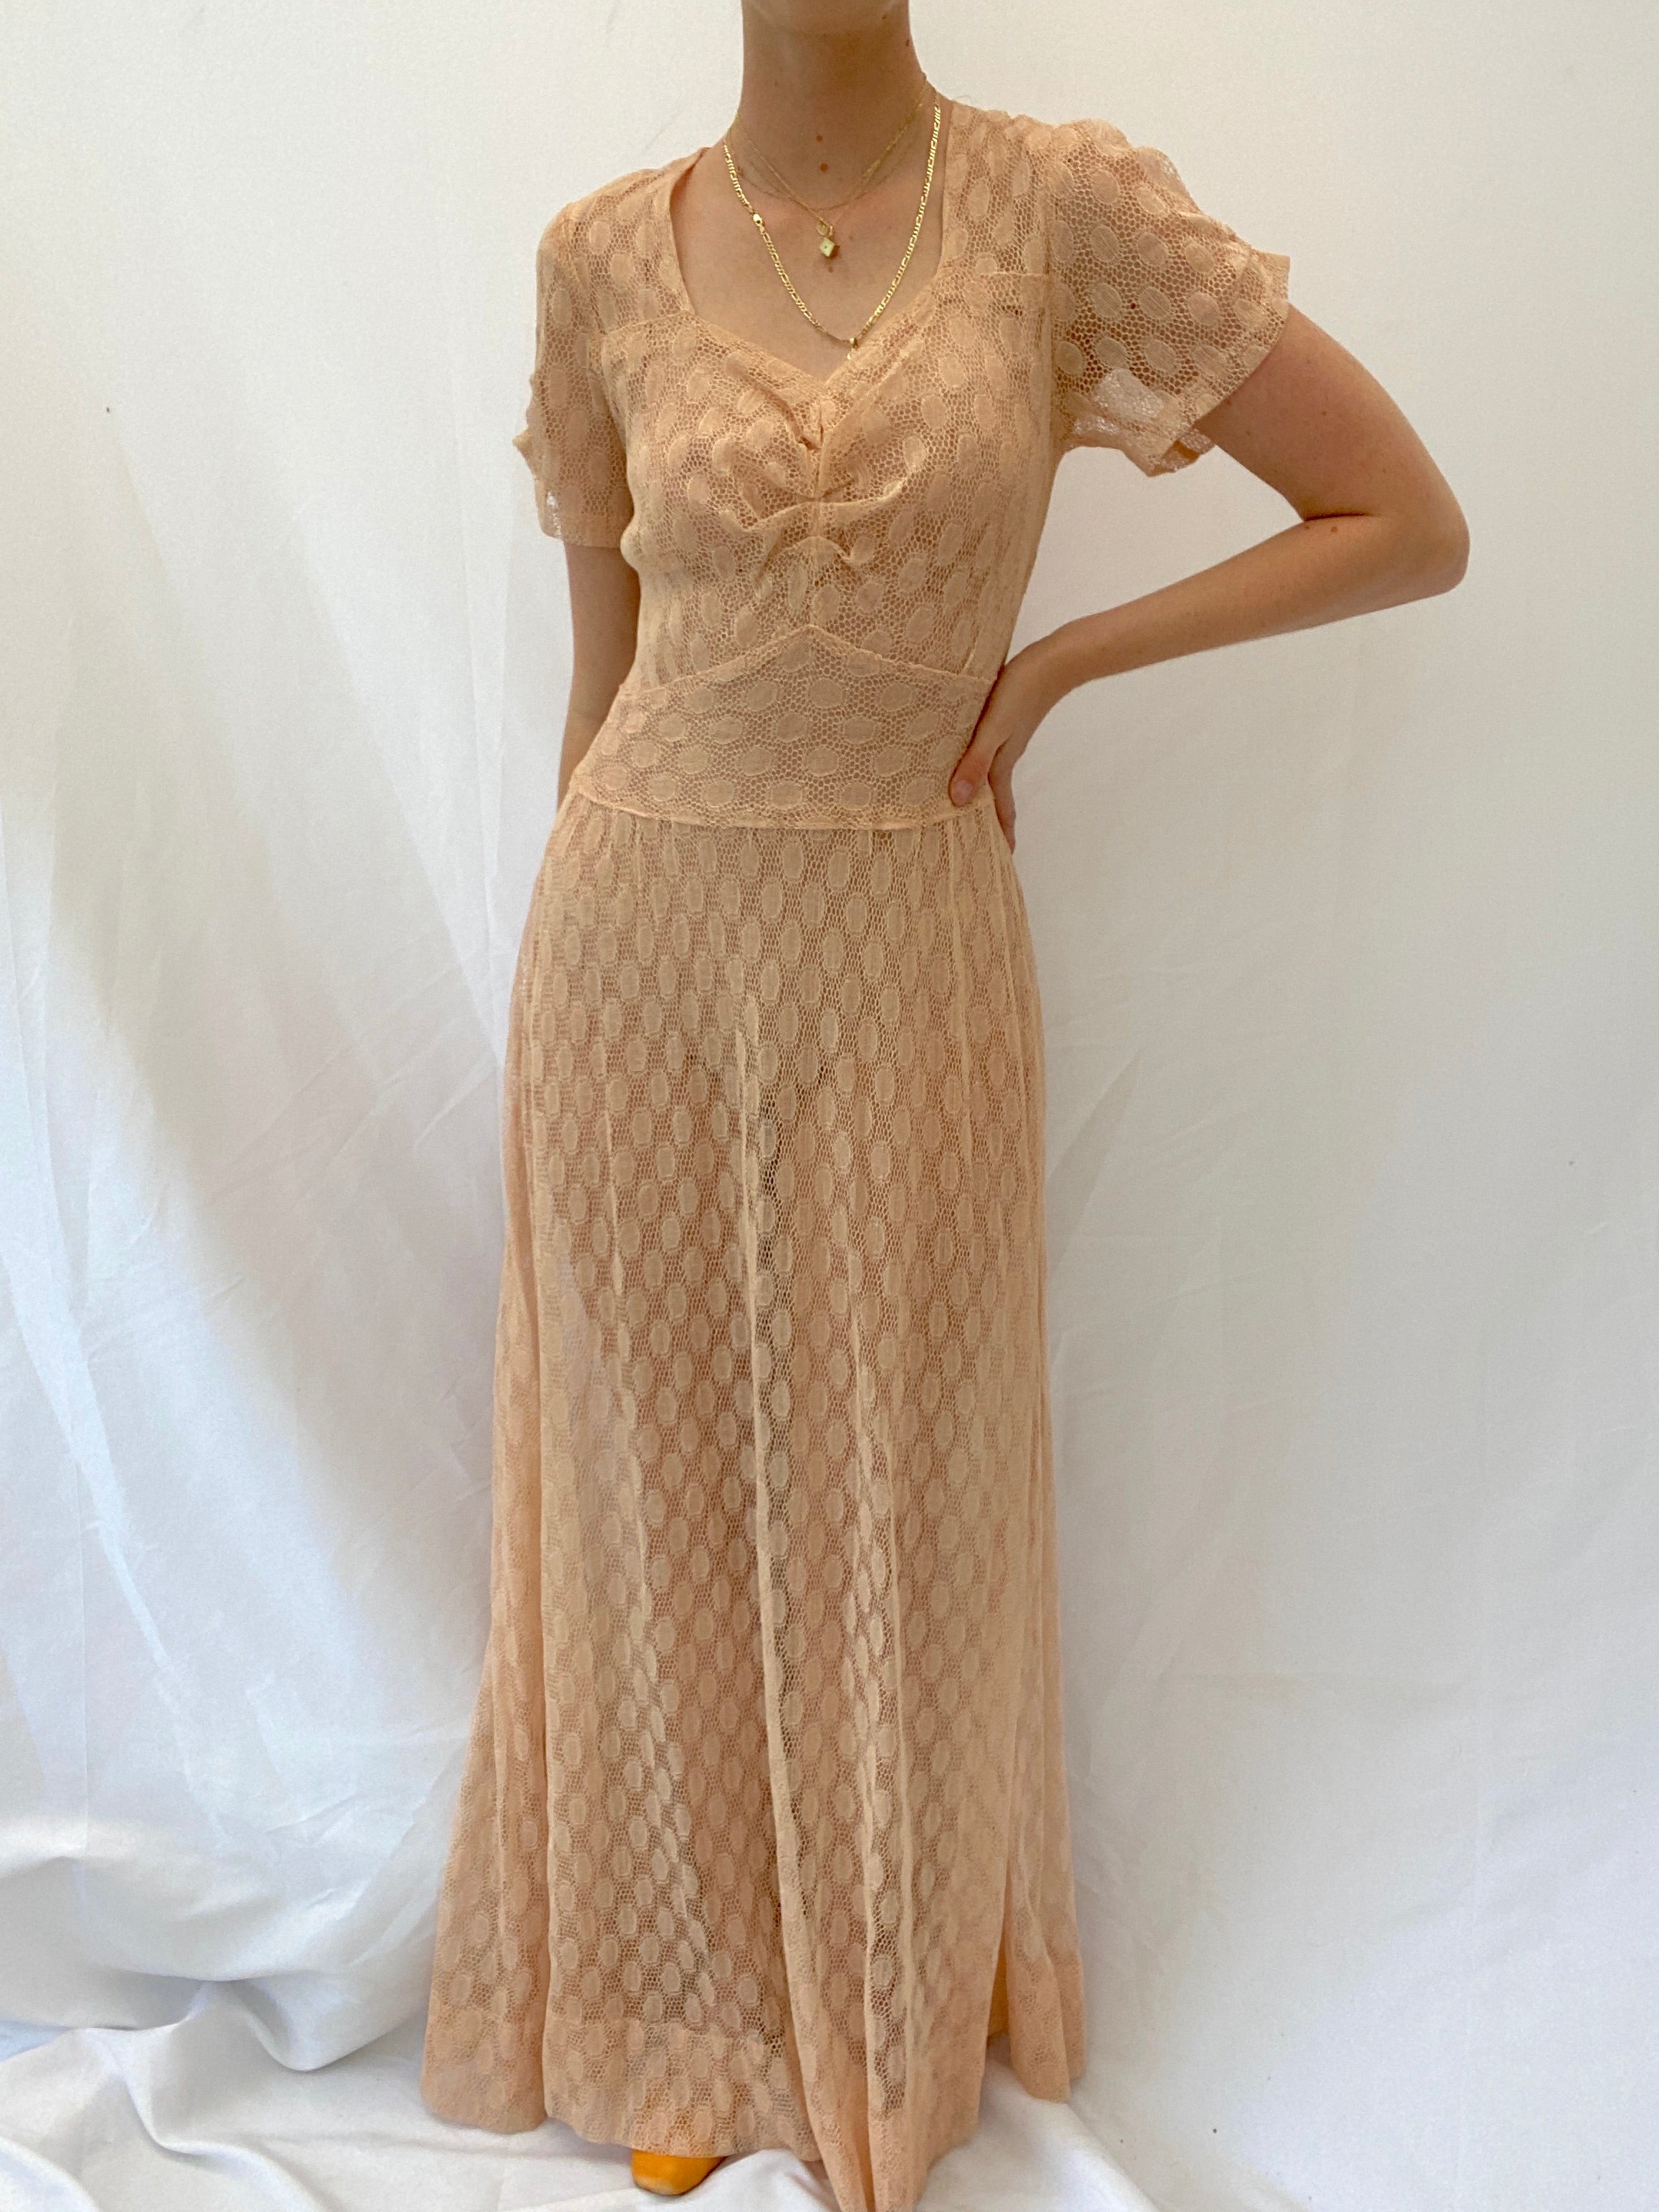 1940's Pink Polka Dot Net Gown with Sweetheart Neckline